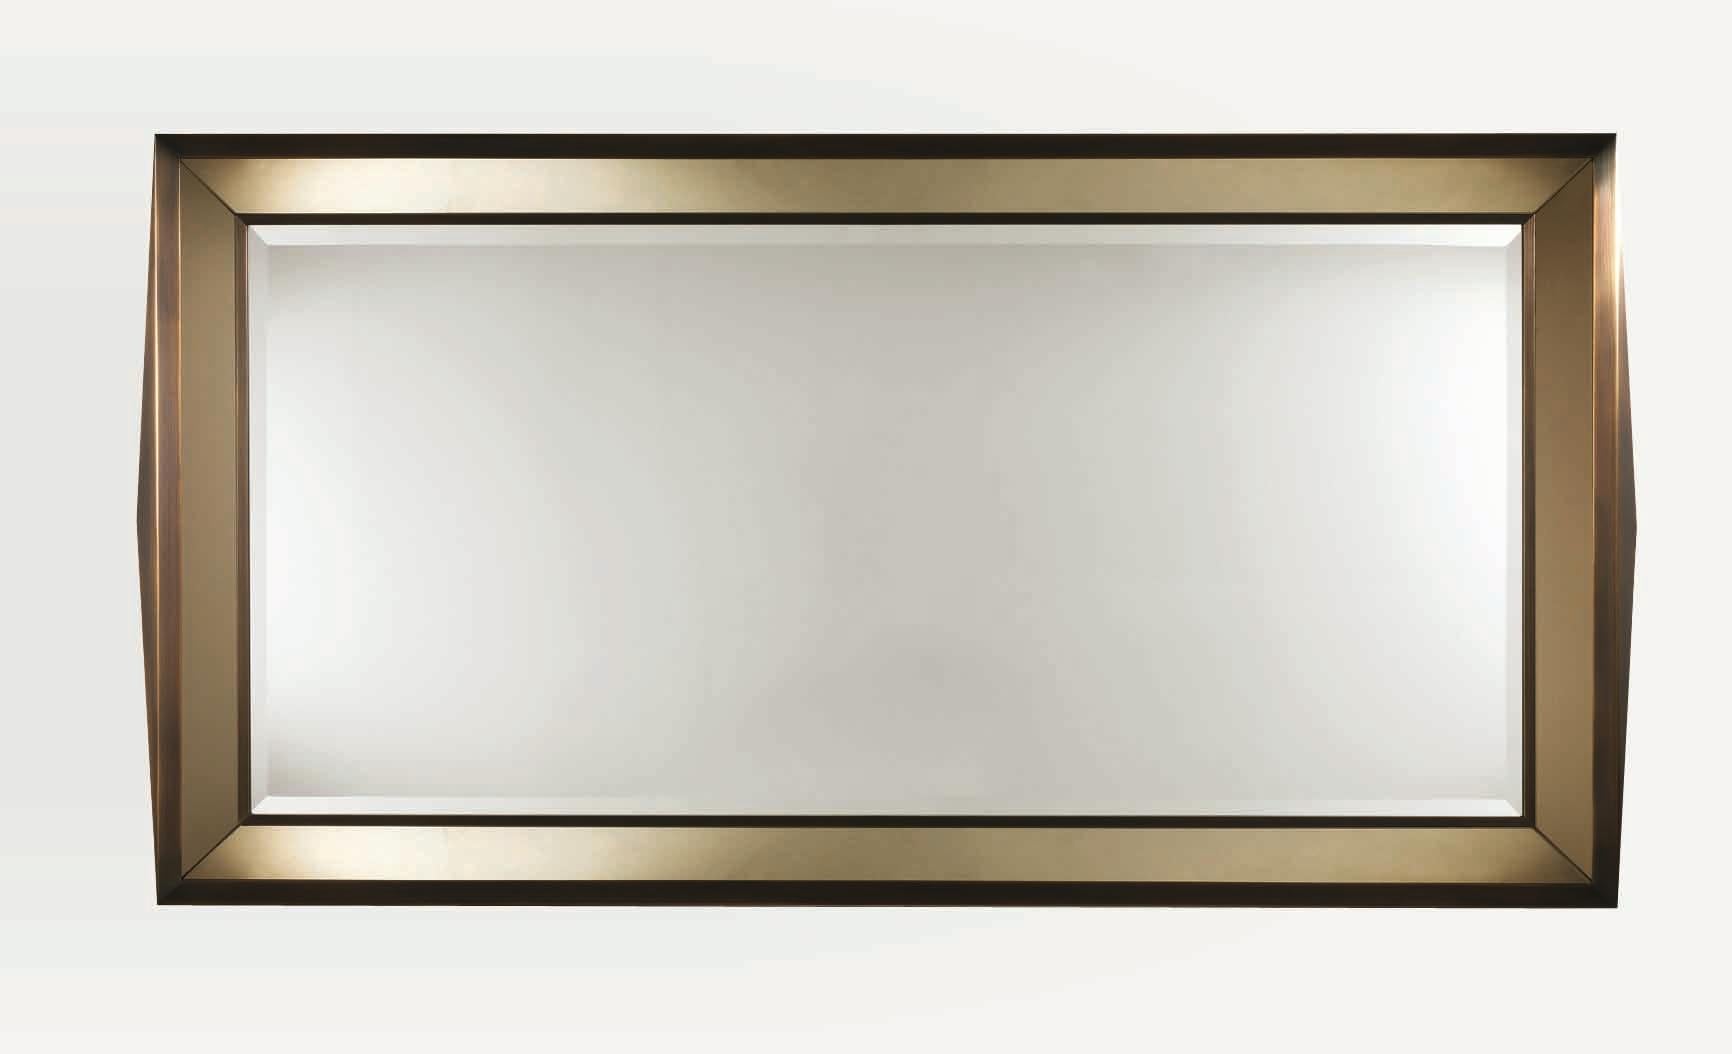 Bronze frame with side diamond shape and outer edges of mirror in bronzed mirror.